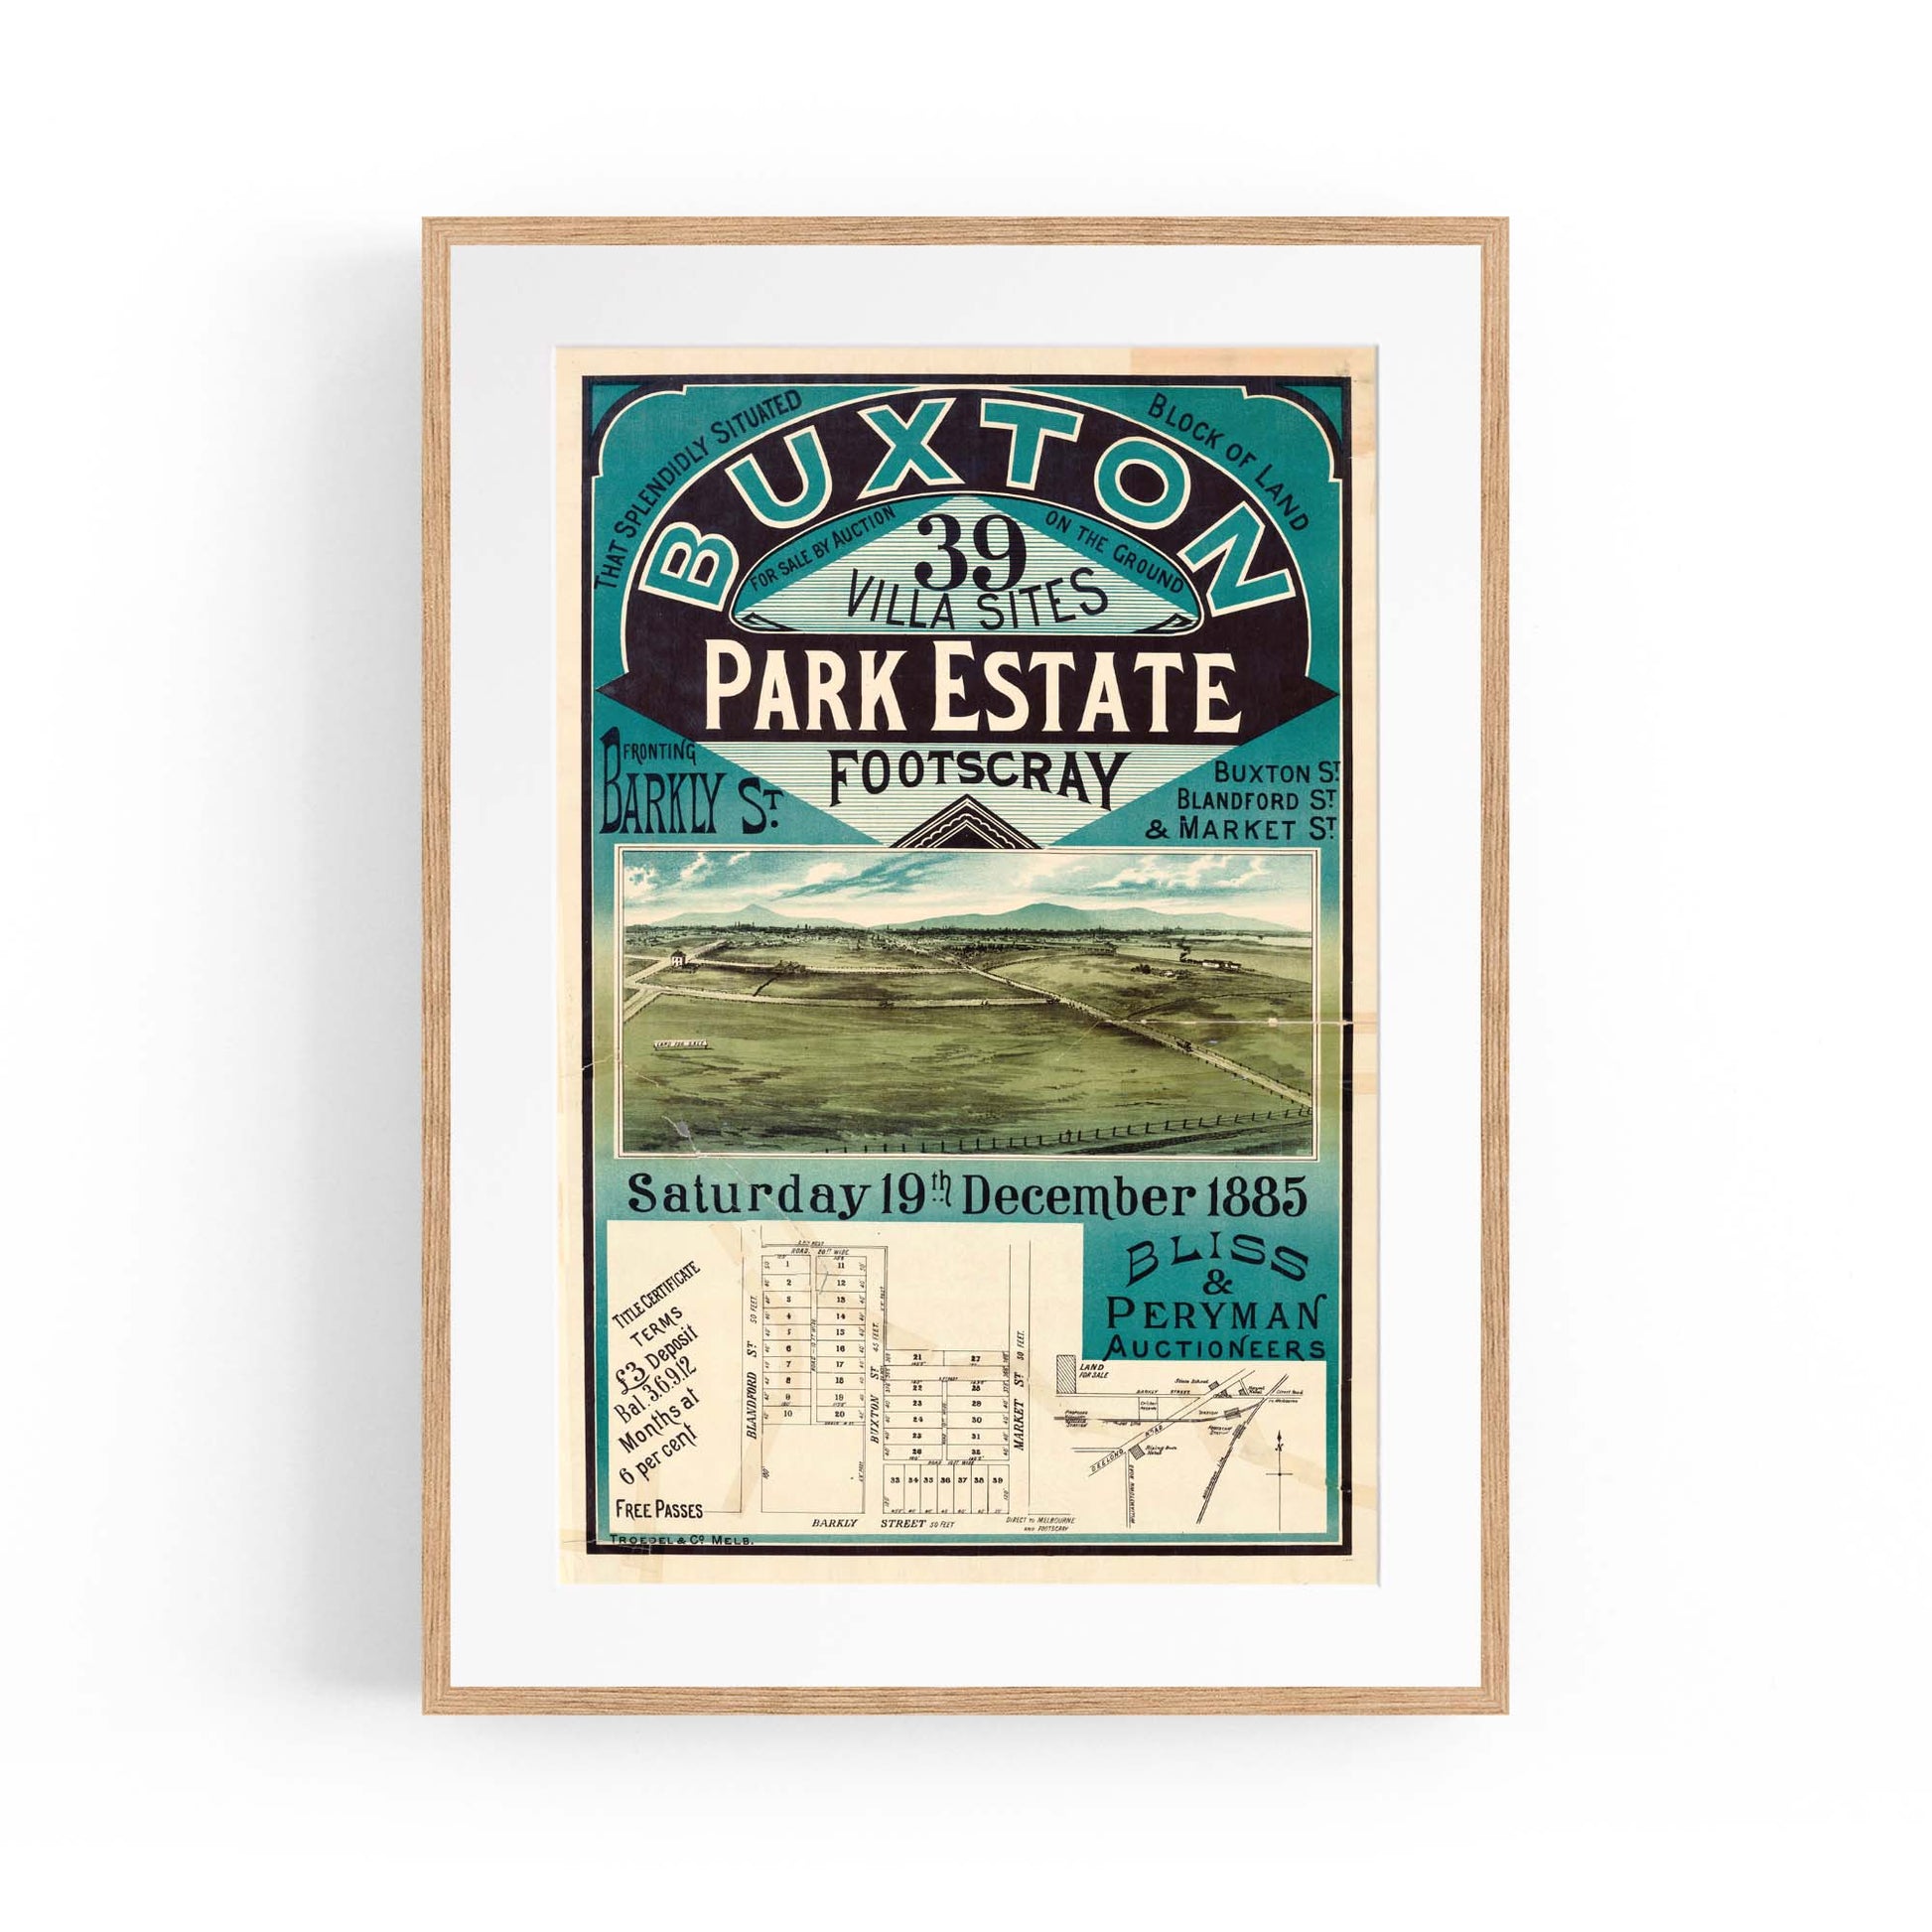 Footscray Melbourne Vintage Real Estate Advert Art - The Affordable Art Company